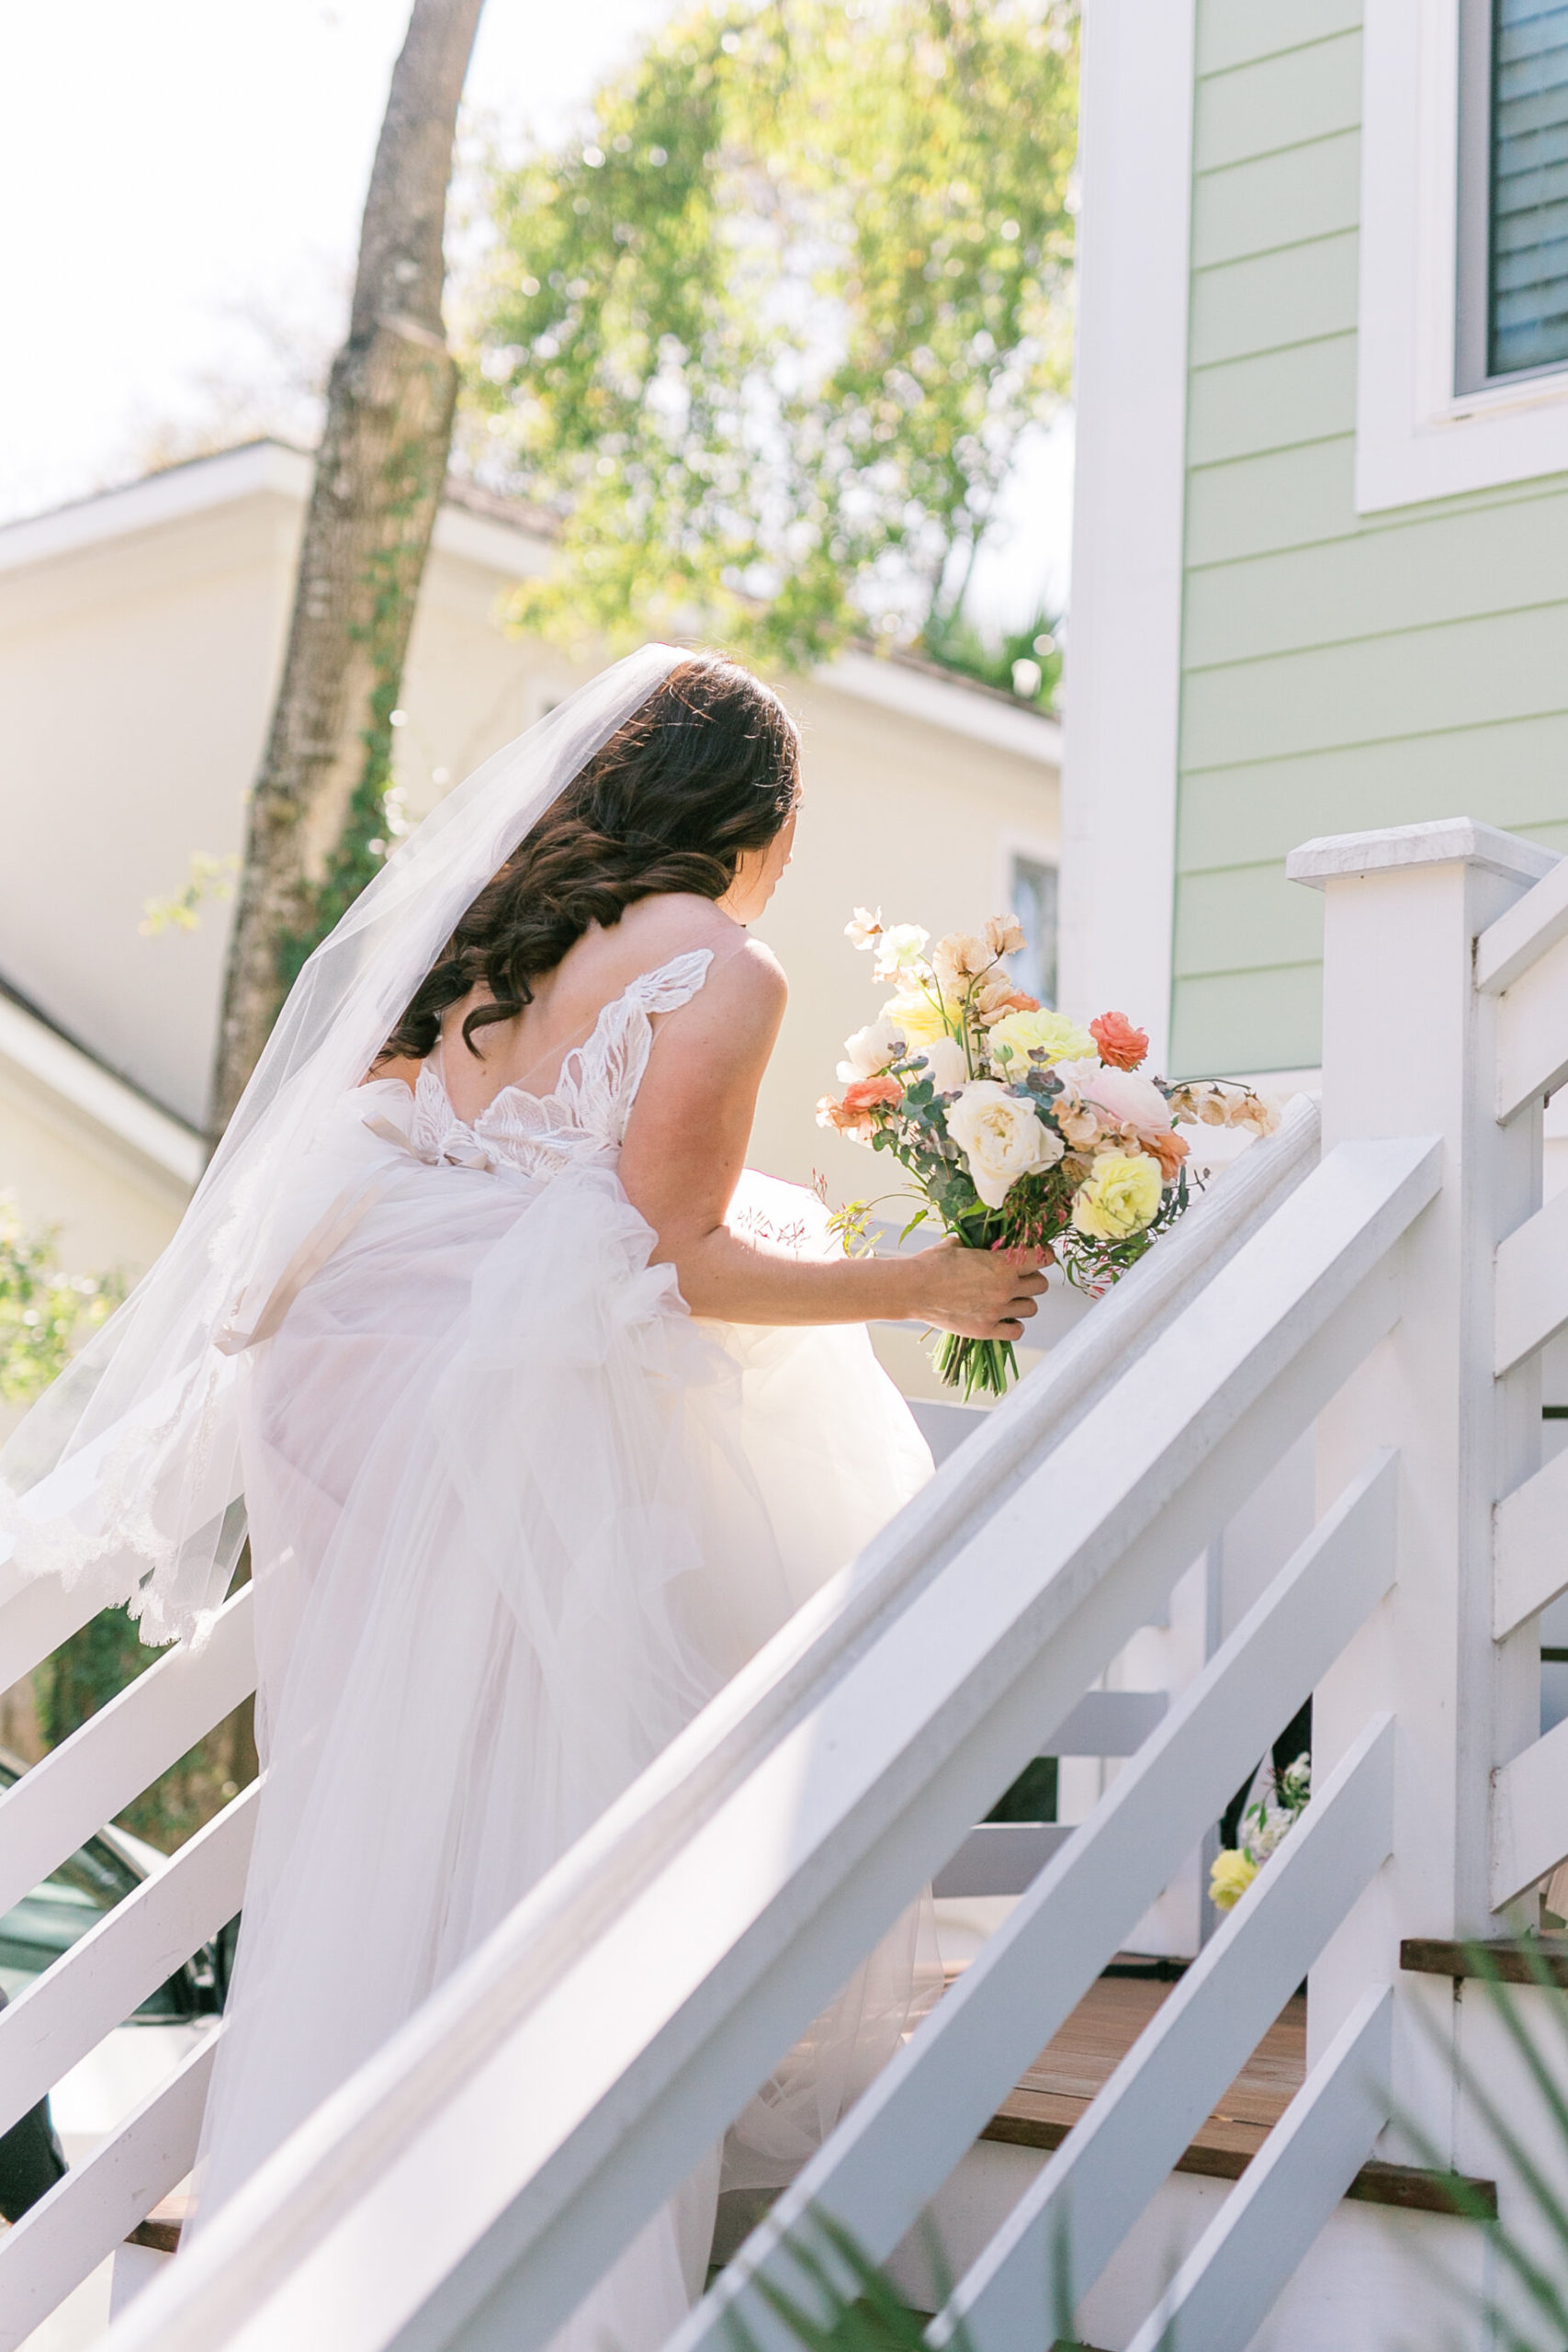 Beautiful bride shares a sweet moment in the sunlight